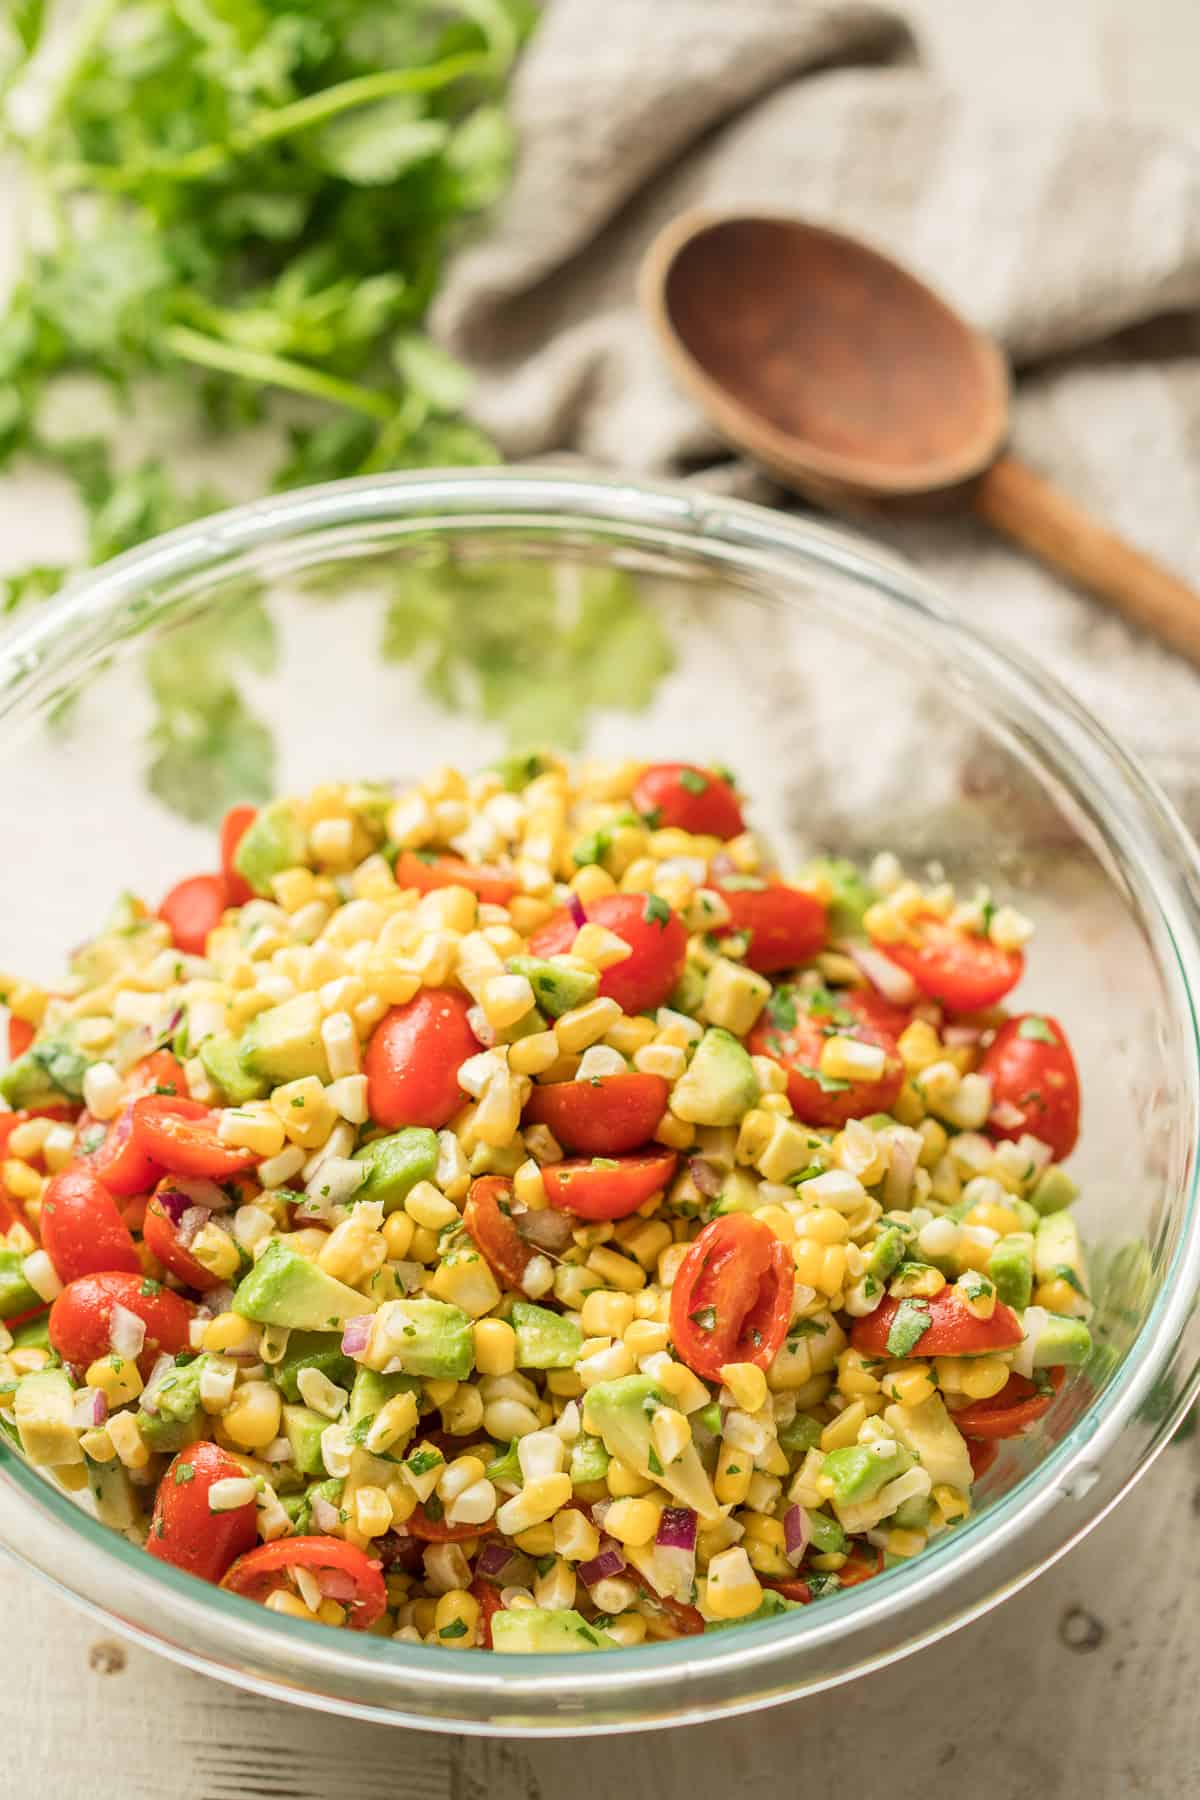 Glass Bowl of Avocado Corn Salad with Wooden Spoon in the Background